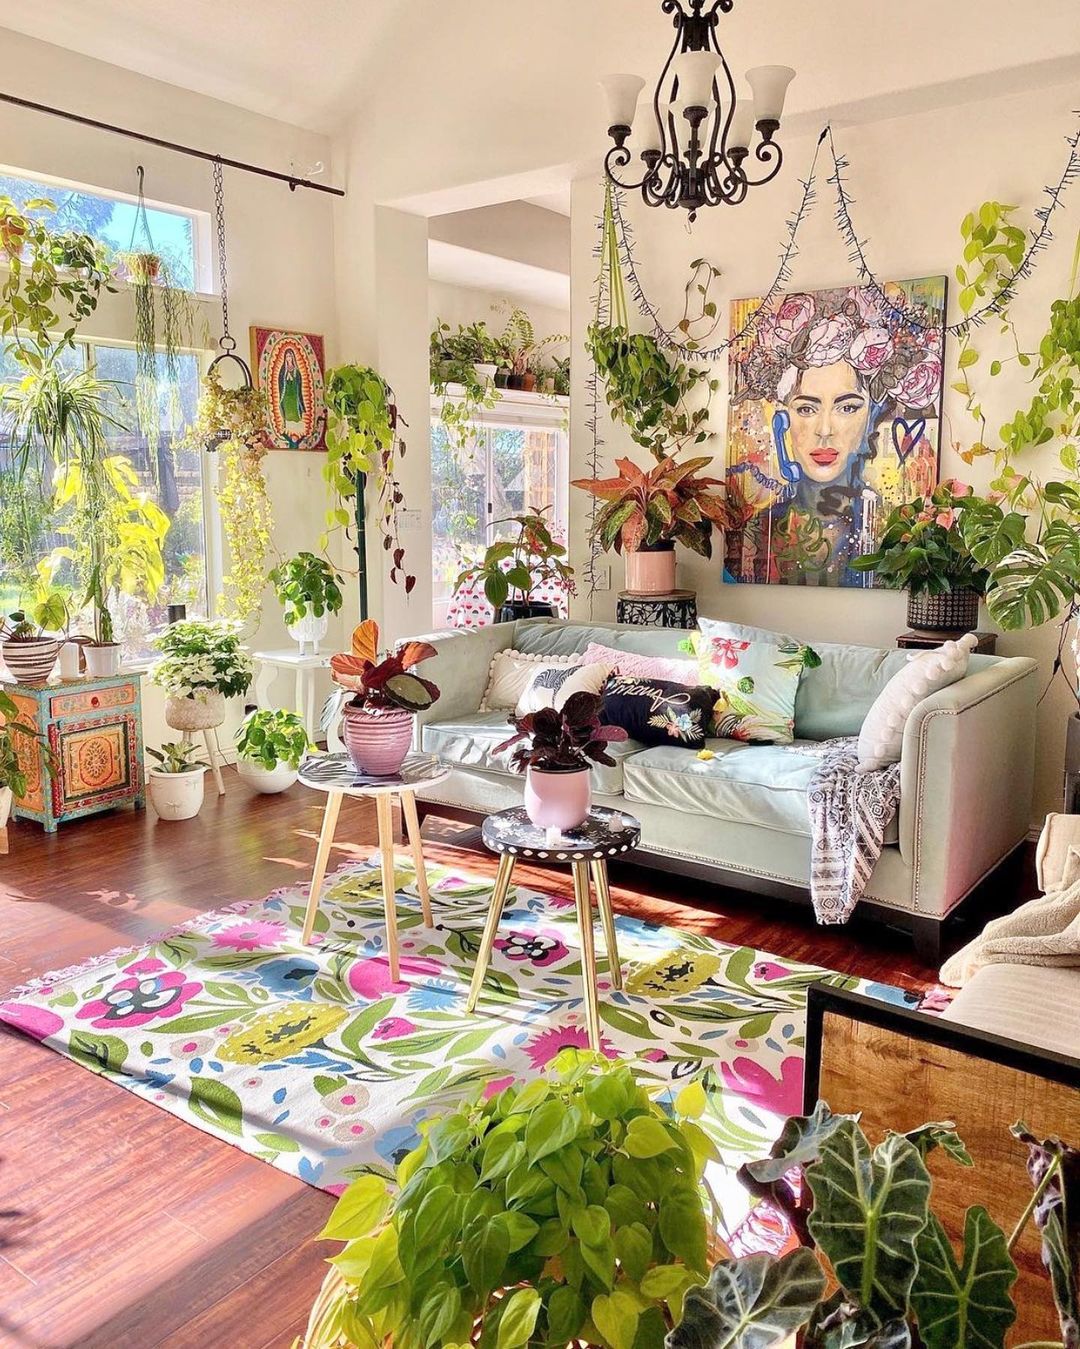 Open livingroom with several windows, high ceilings, and over 20 plants, including a pathos, English Ivy, spider plant, and Monstera. The room rug features bright, simple flowers and leaves.